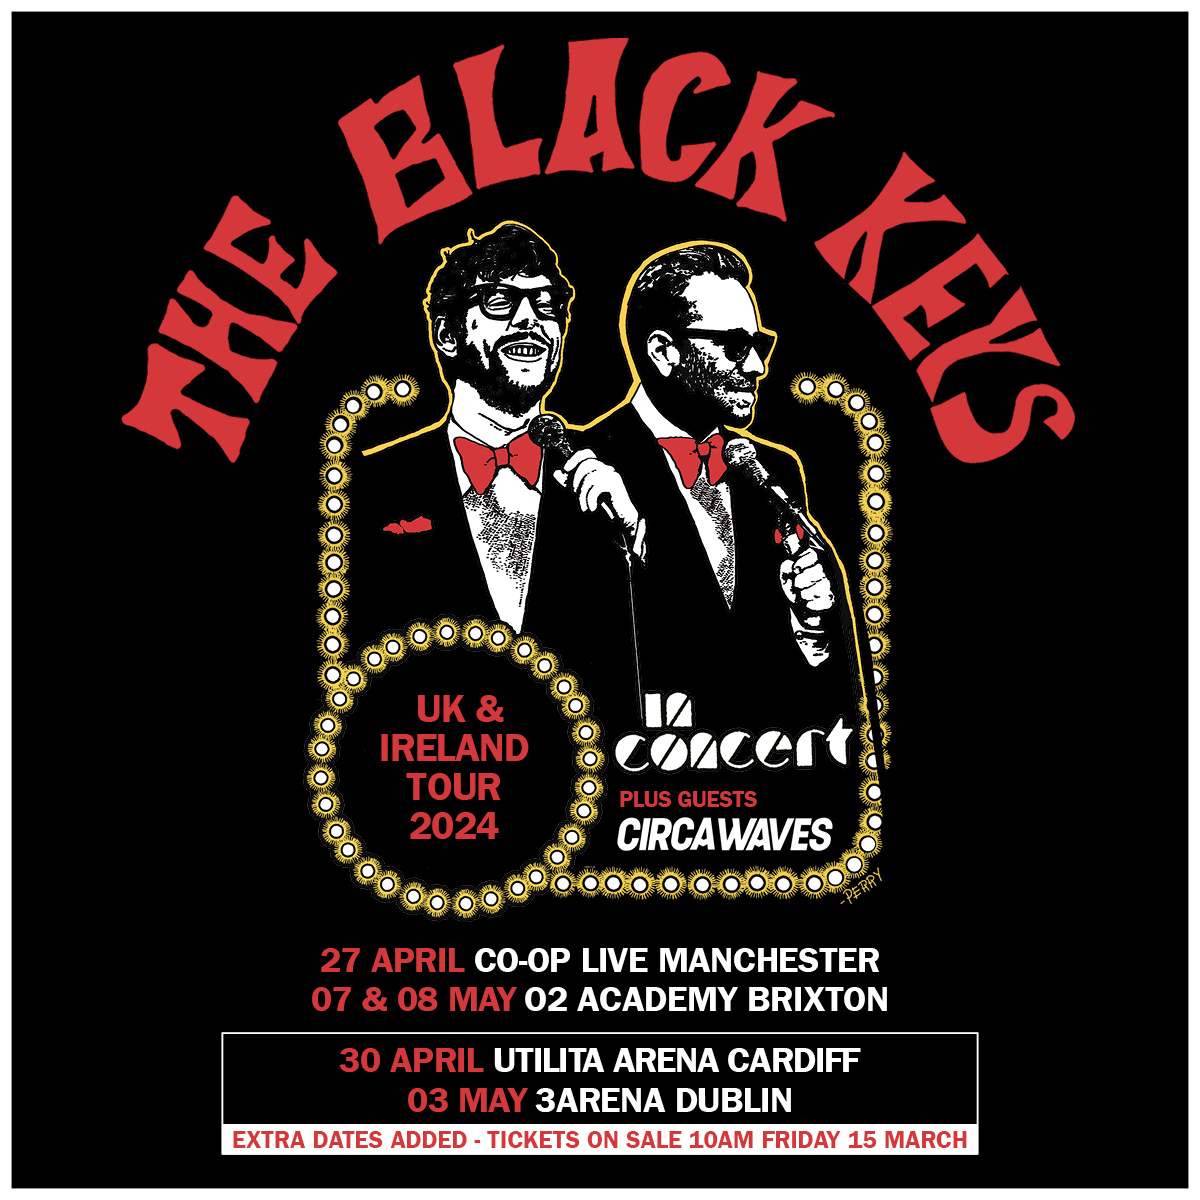 Excited to be joining @theblackkeys on their UK & Ireland shows in April & May, we've decided to add in a headline show in Belfast on 4th May. Our first time playing a headline show in Ireland! Let’s make it one to remember!! Tickets on sale Friday 10am. bit.ly/49OviBL